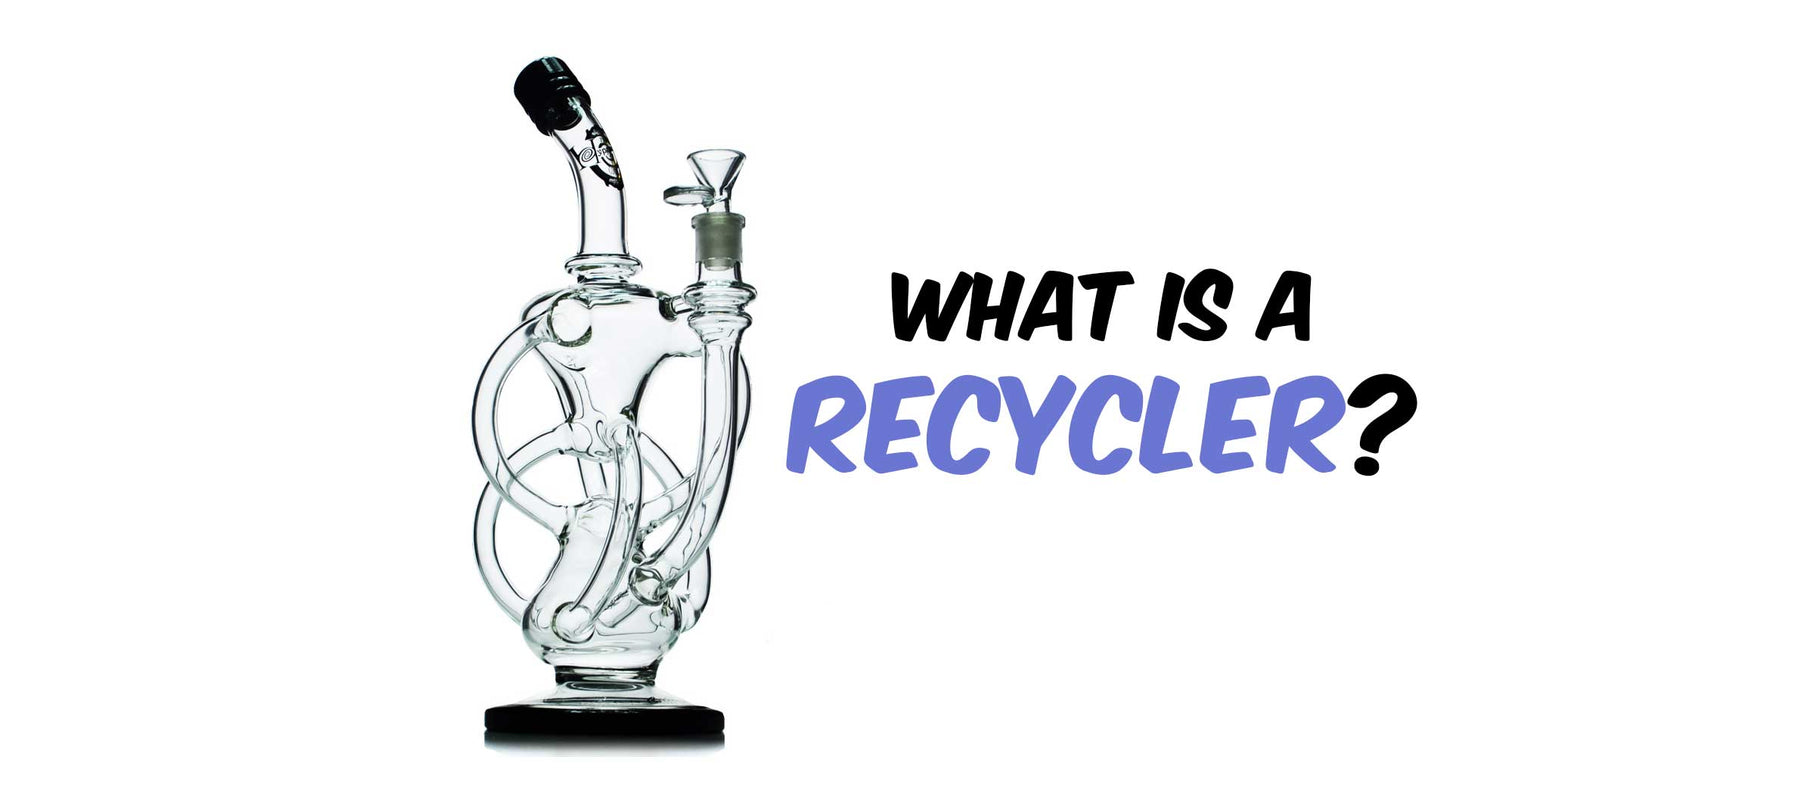 What Is A Recycler Bong?